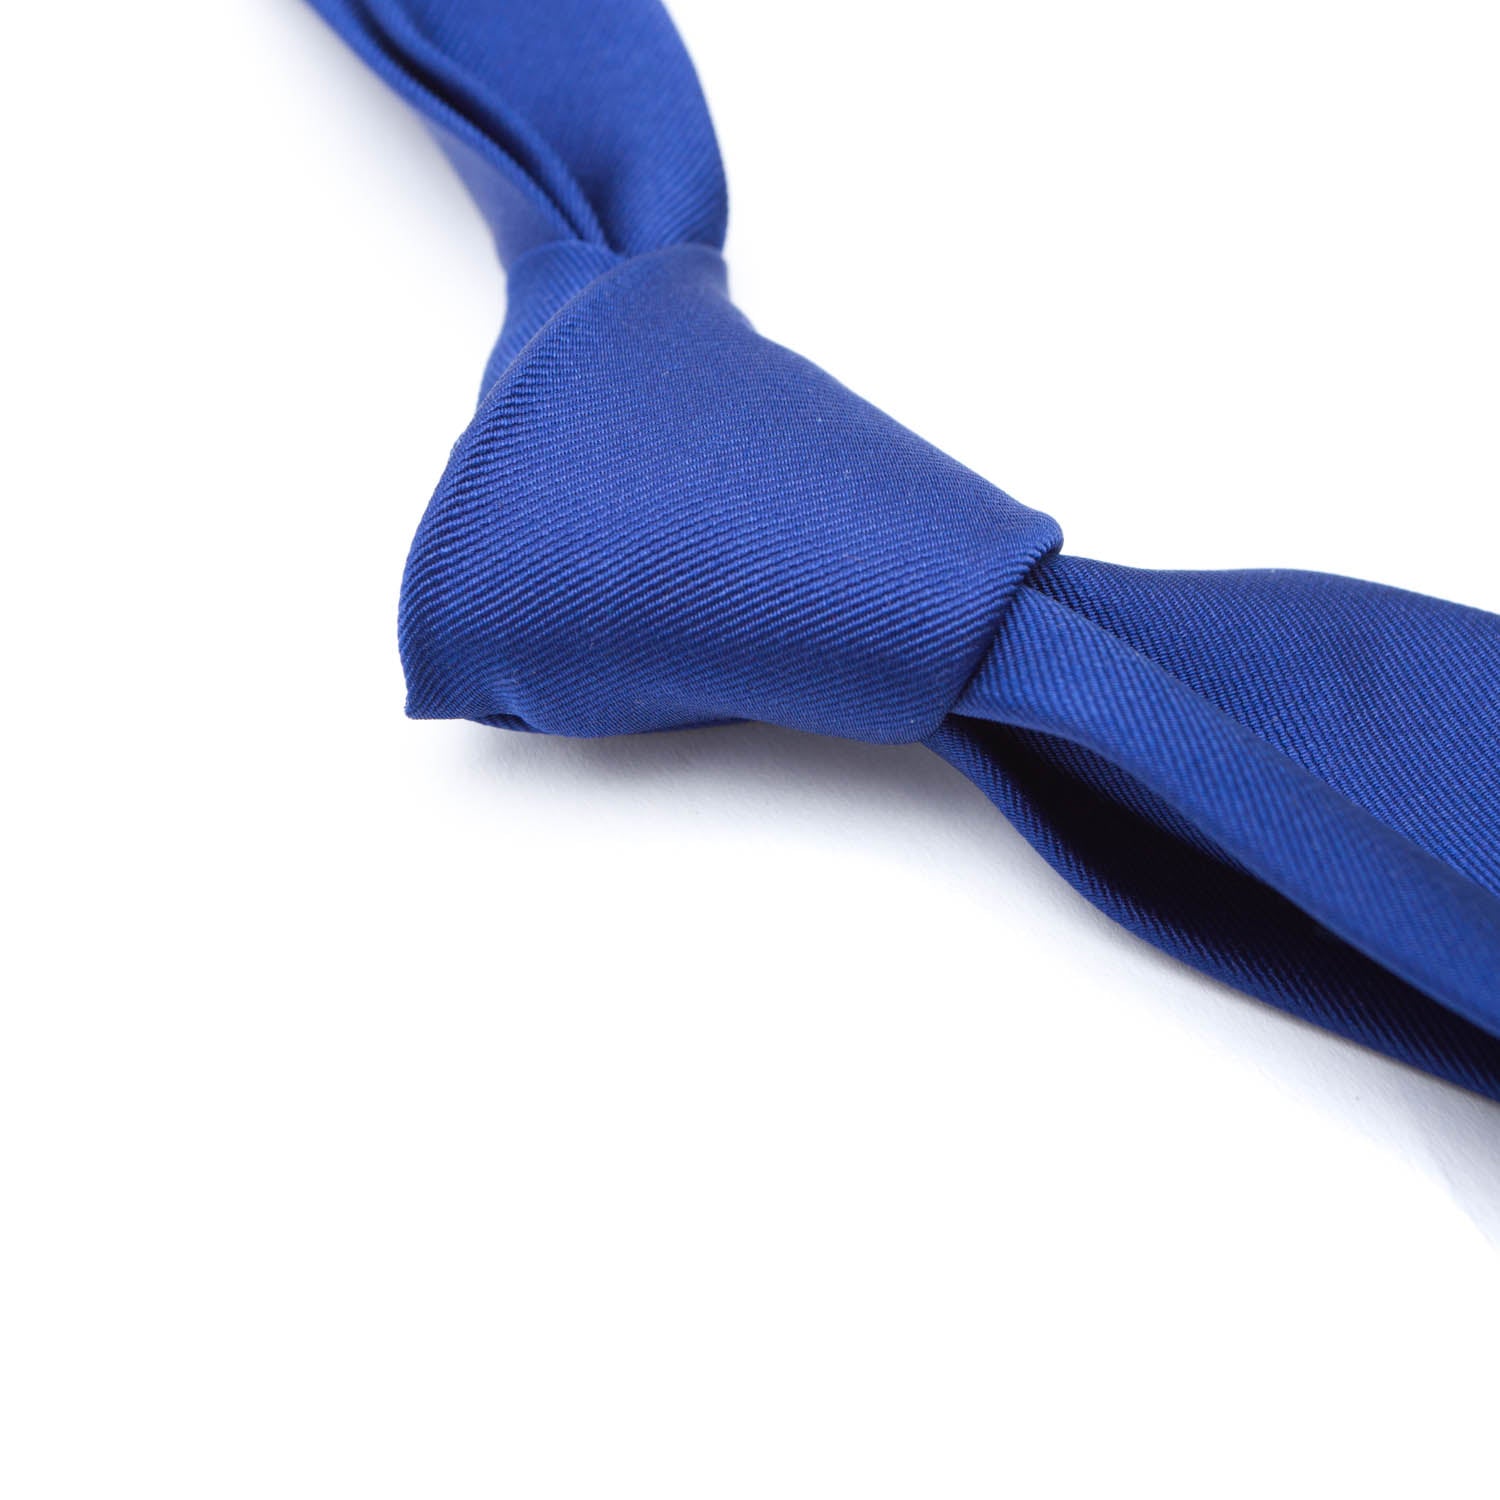 A Sovereign Grade Blue Satin Tie by KirbyAllison.com on a white background.